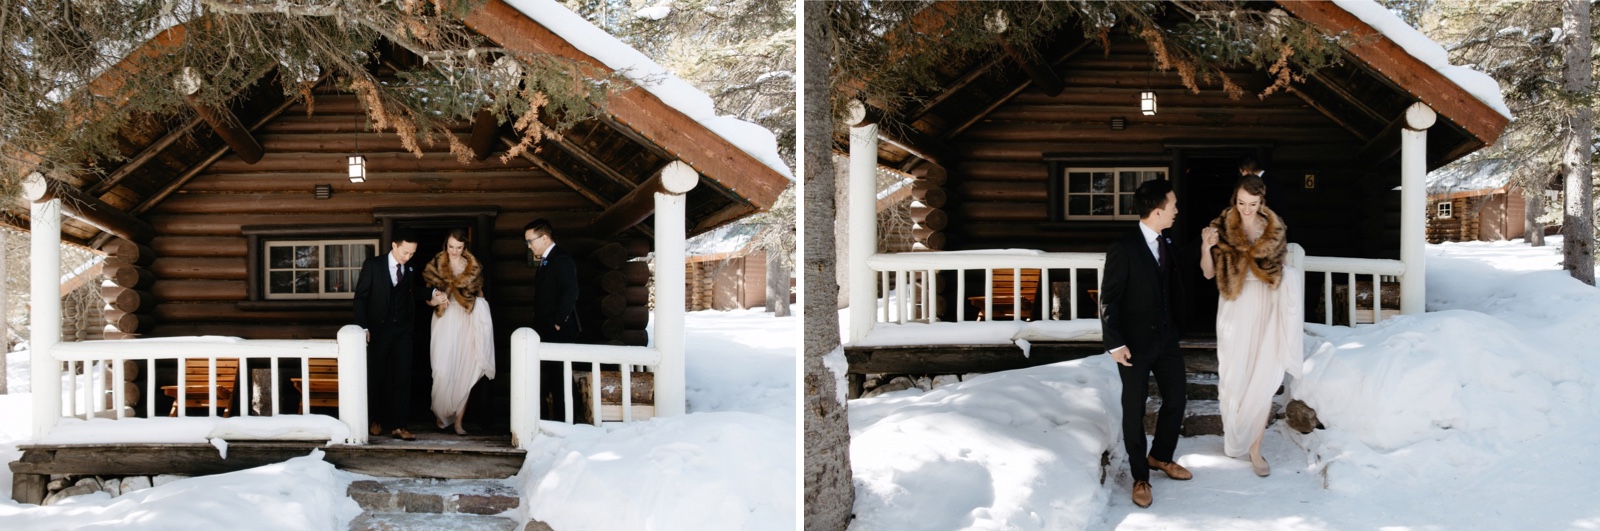 Wedding at the historic cabins in Banff National Park at Storm Mountain Lodge